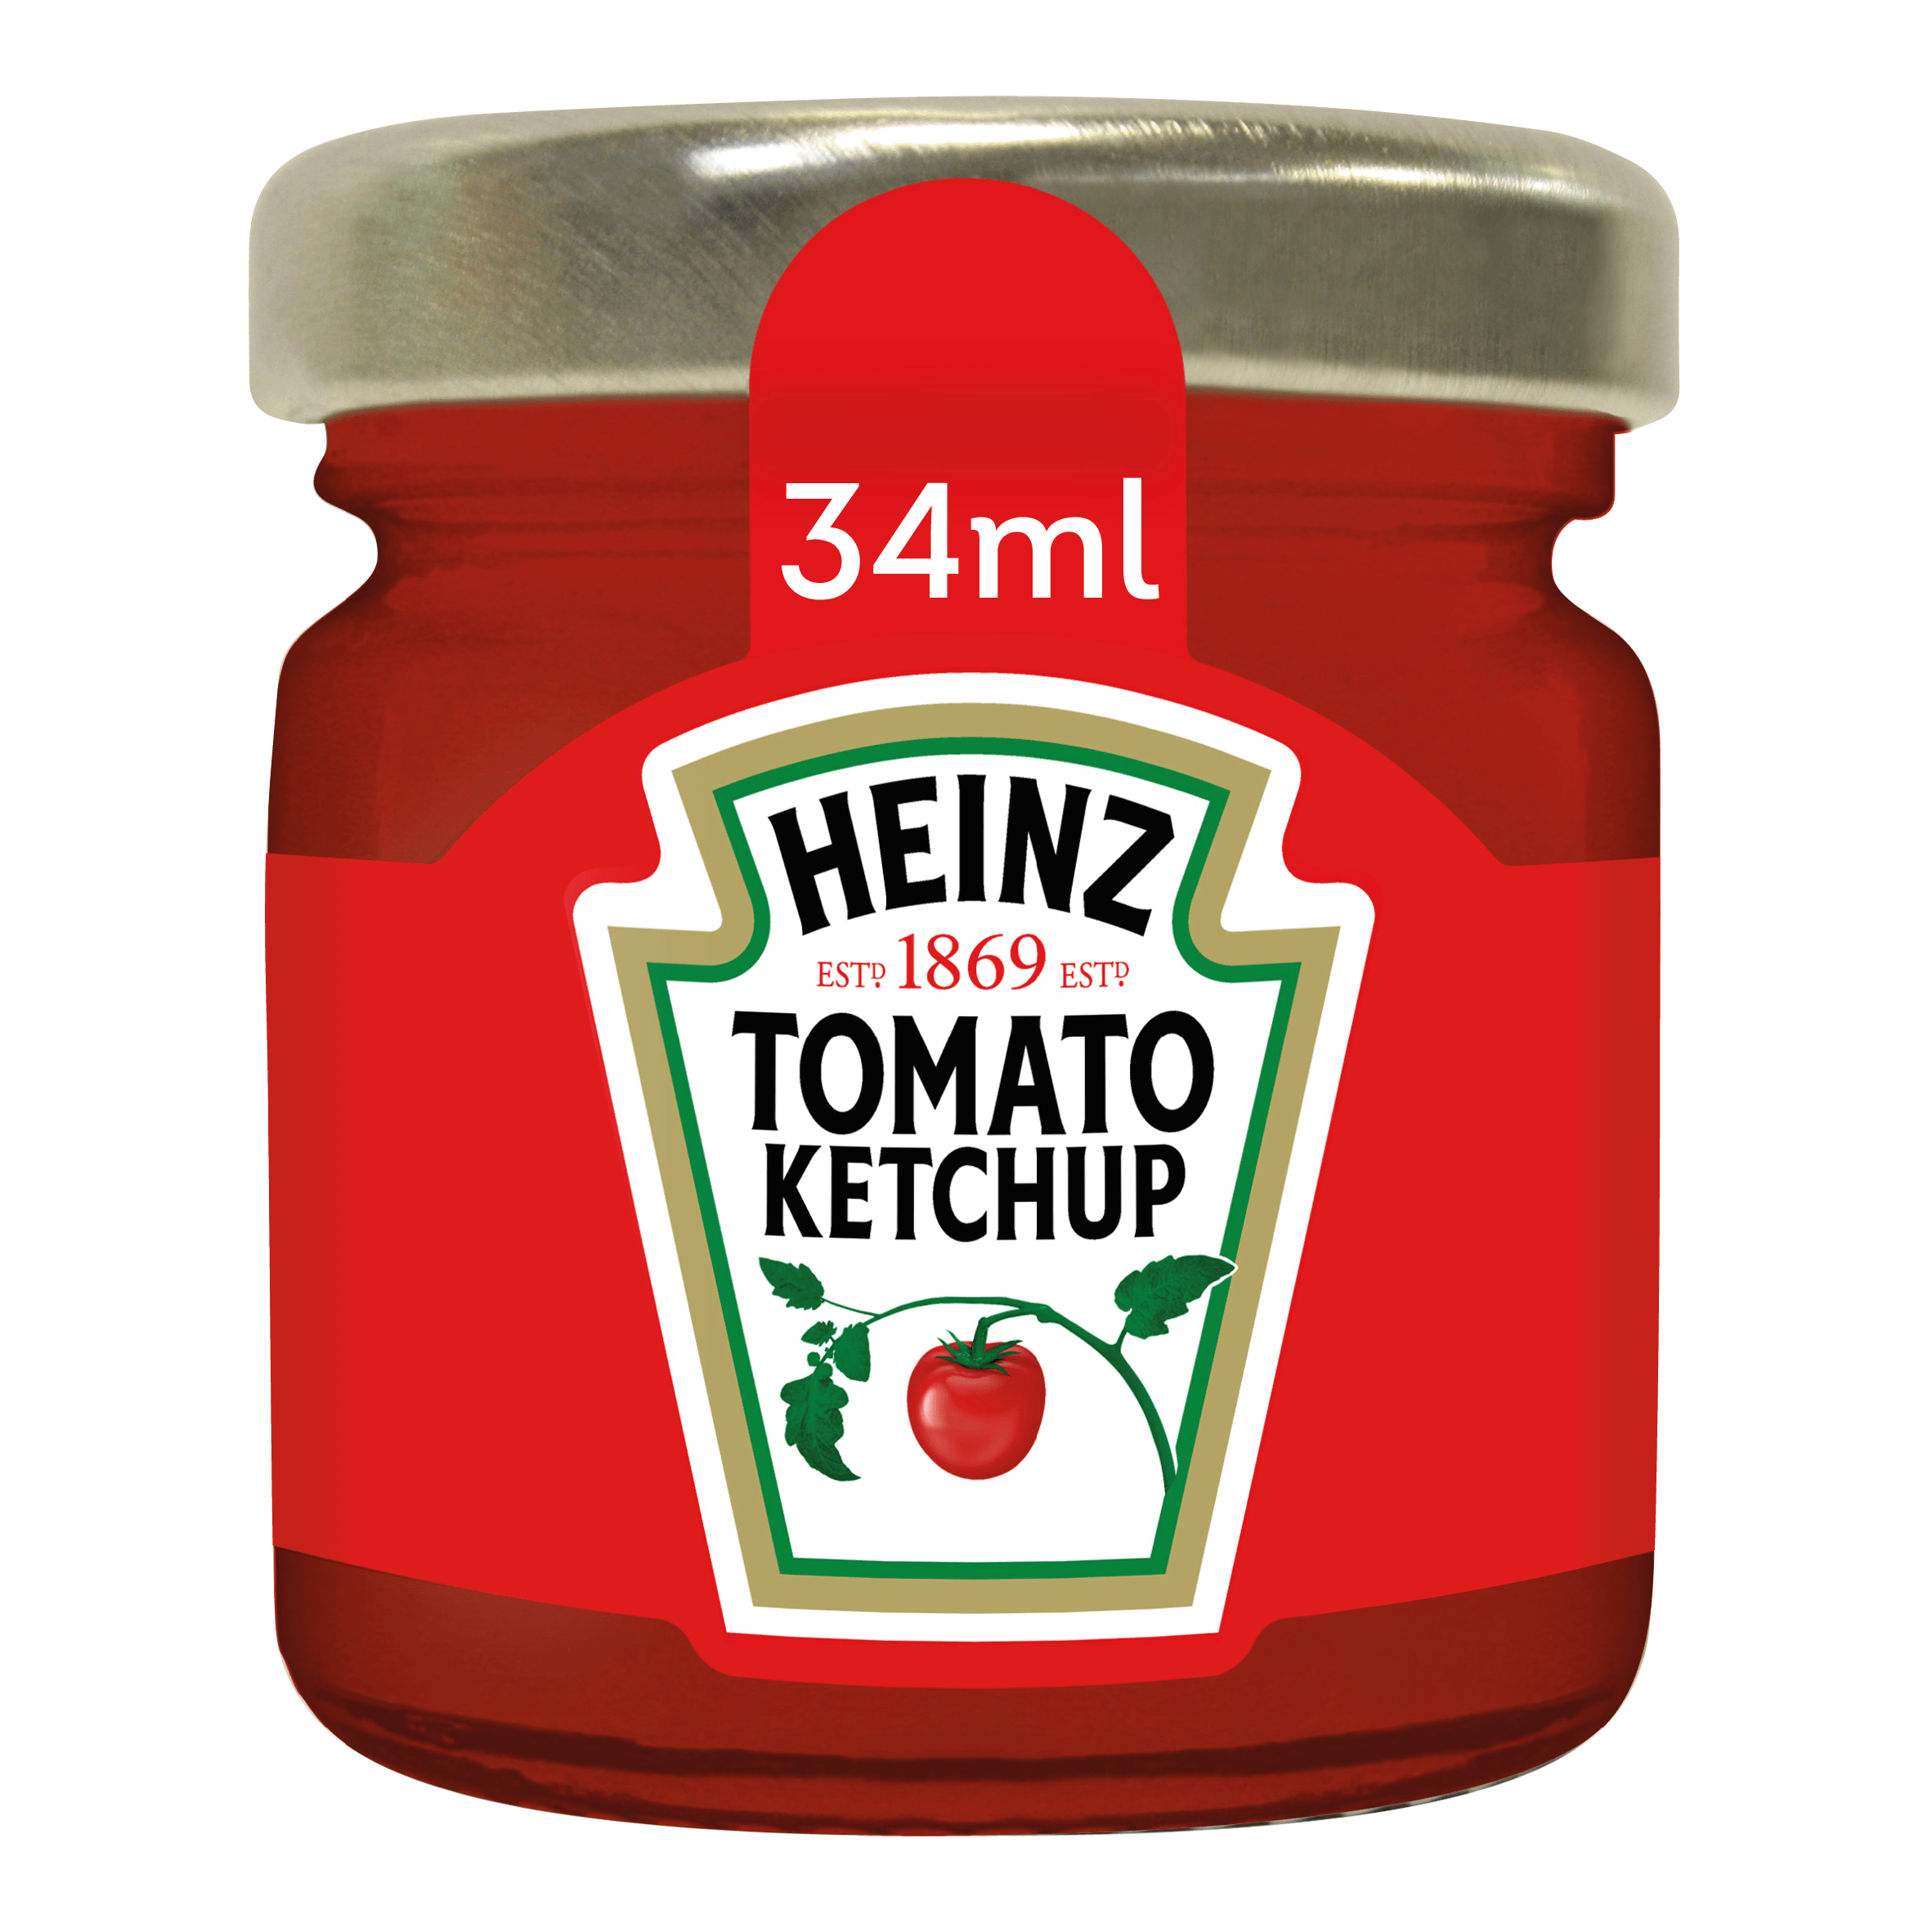 Heinz Tomato Ketchup Mini Glass Jar Portions - Pack of 80 Jars - Vending Superstore